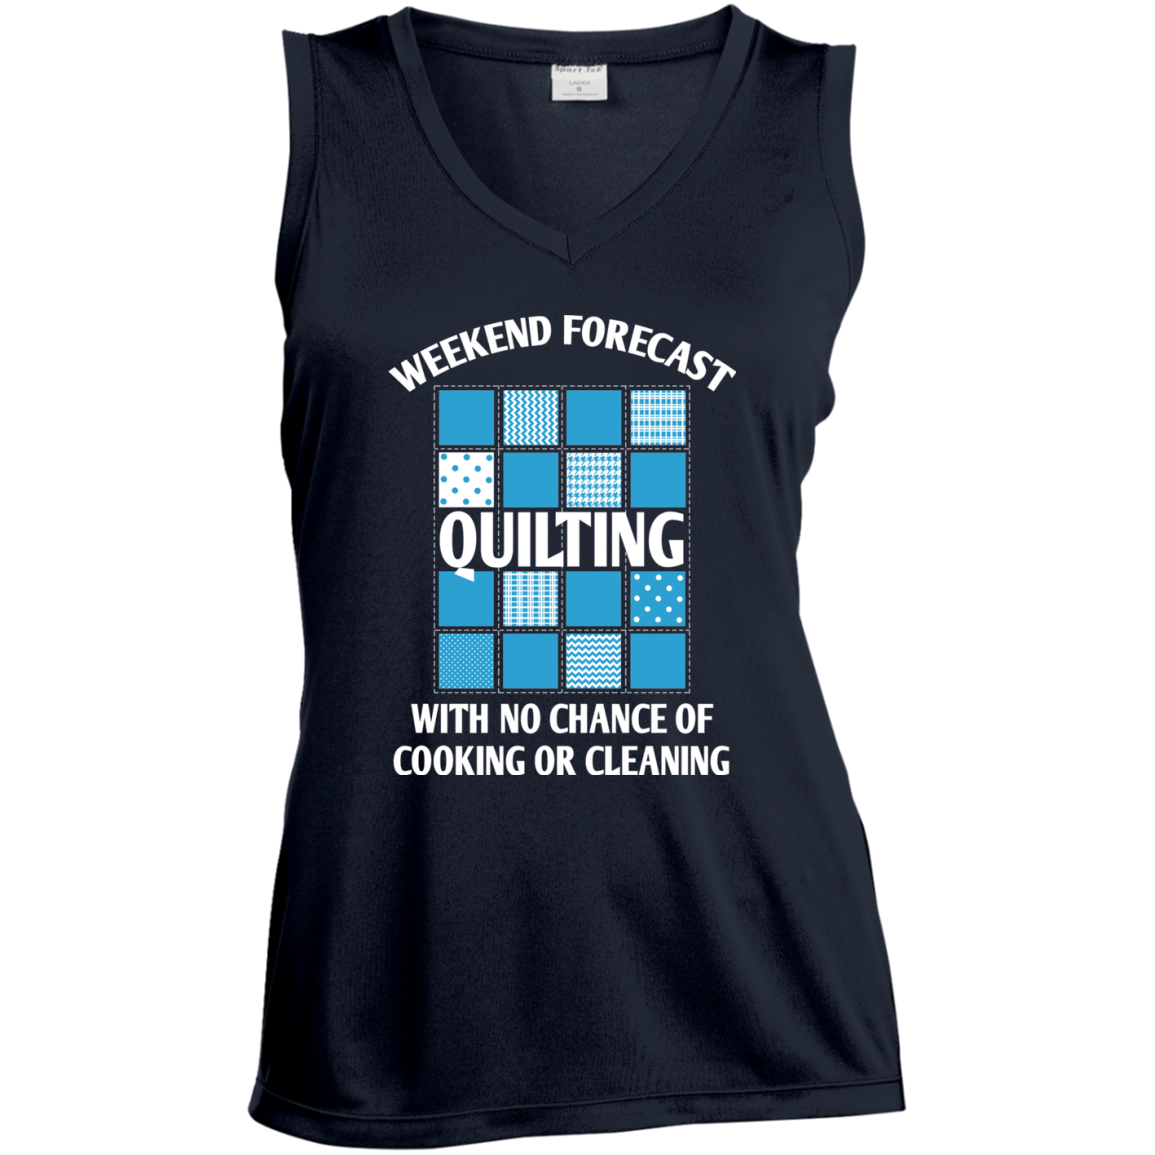 Weekend Forecast Quilting Ladies Sleeveless Moisture Absorbing V-Neck